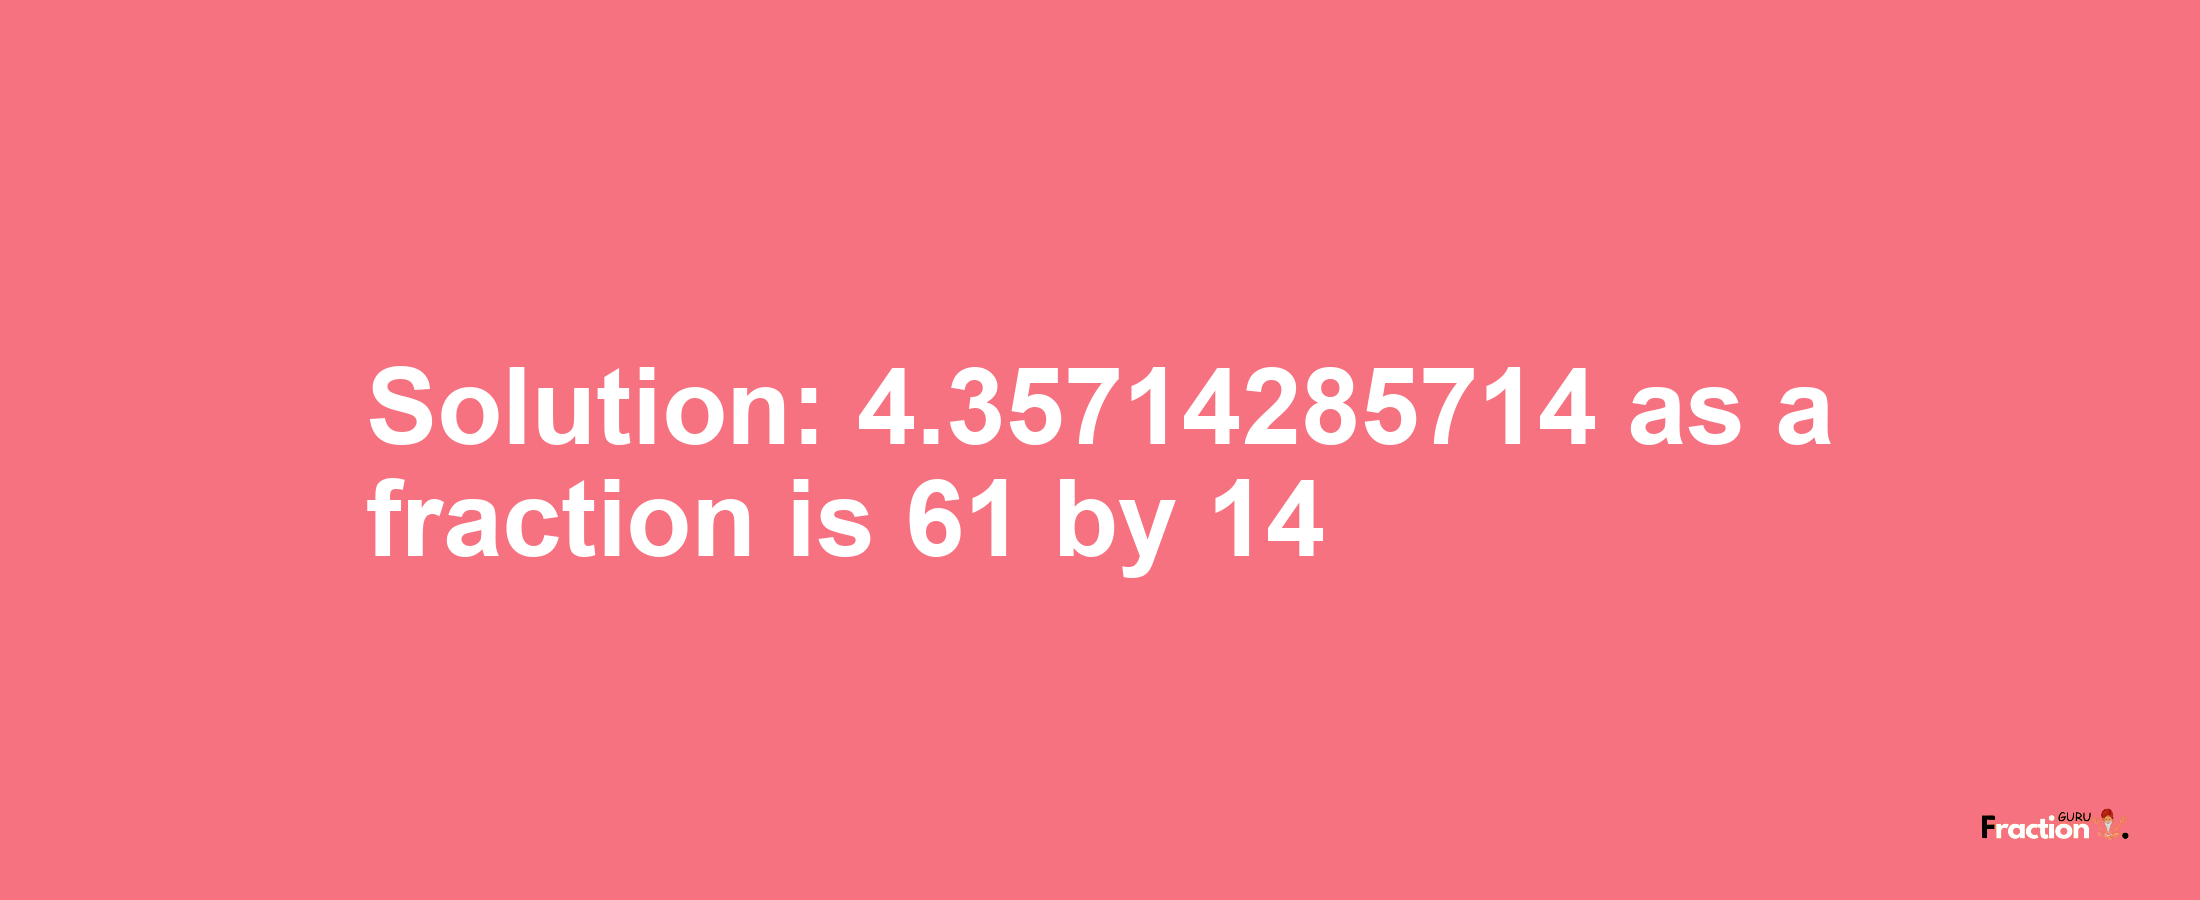 Solution:4.35714285714 as a fraction is 61/14